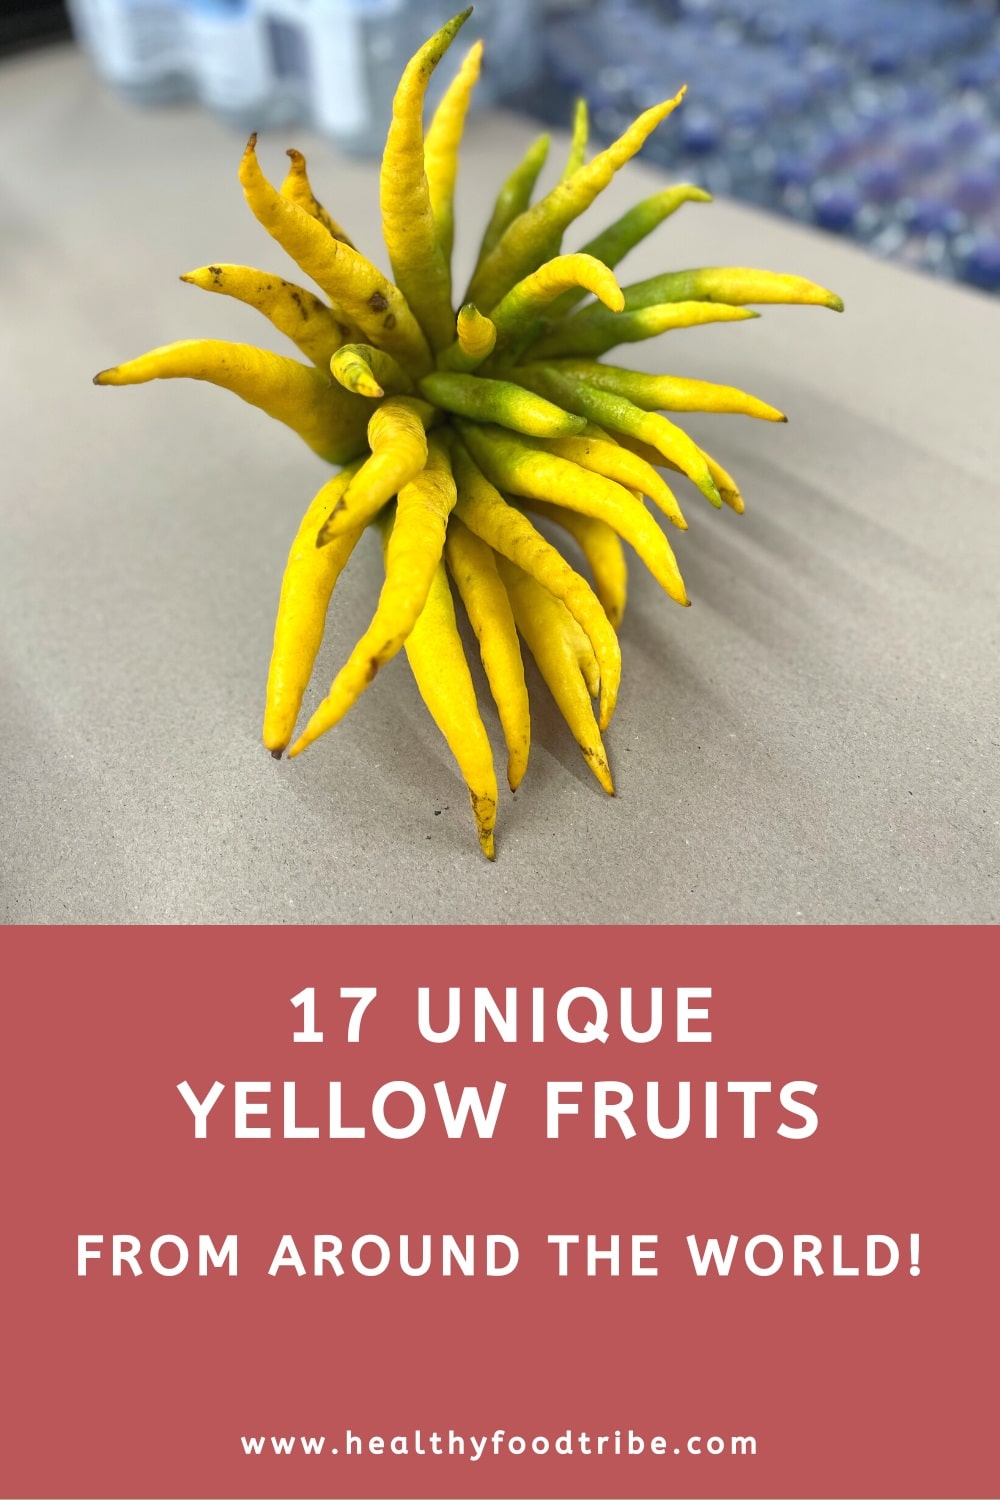 17 Unique yellow fruits from around the world